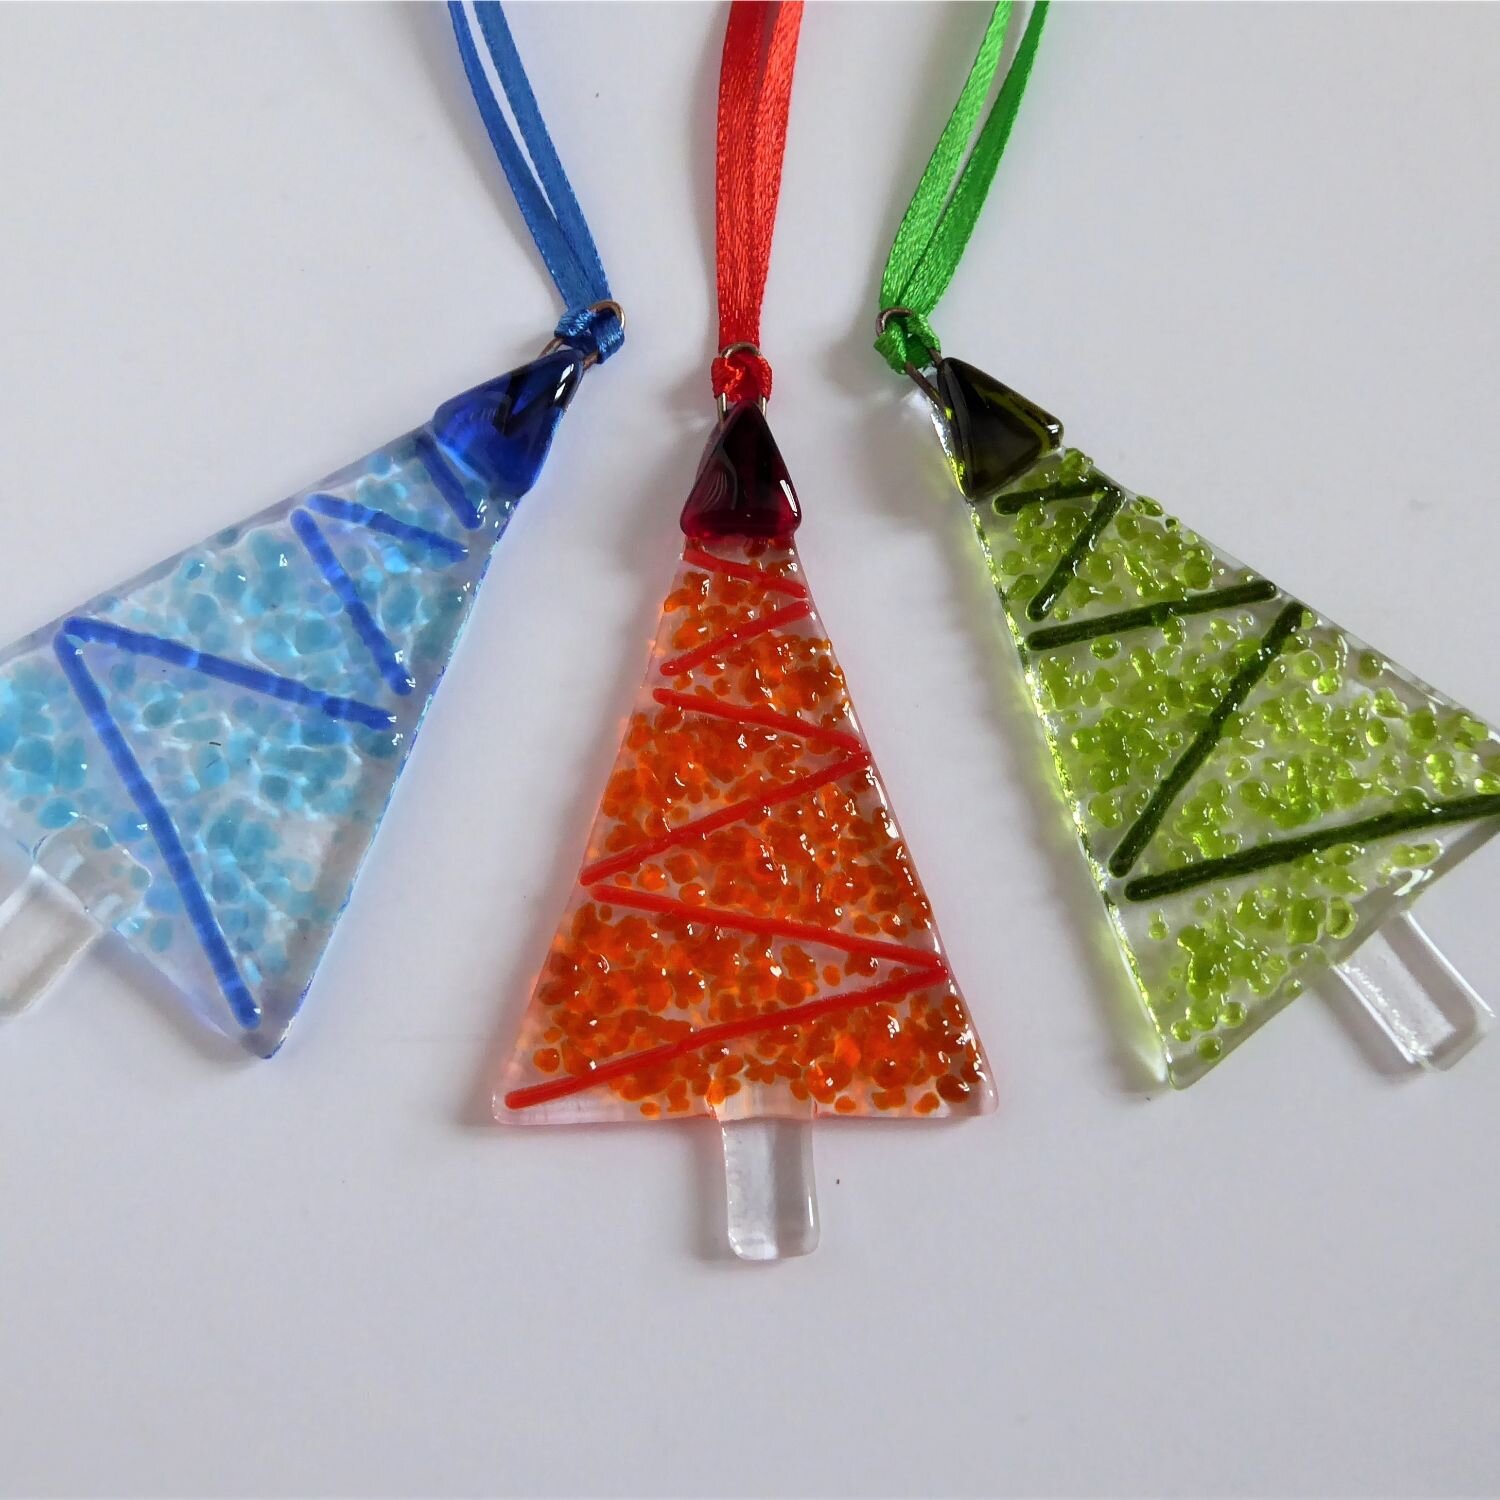  Eva Glass Design fused glass tree-shaped Christmas decorations with a tinsel effect in three colour schemes 